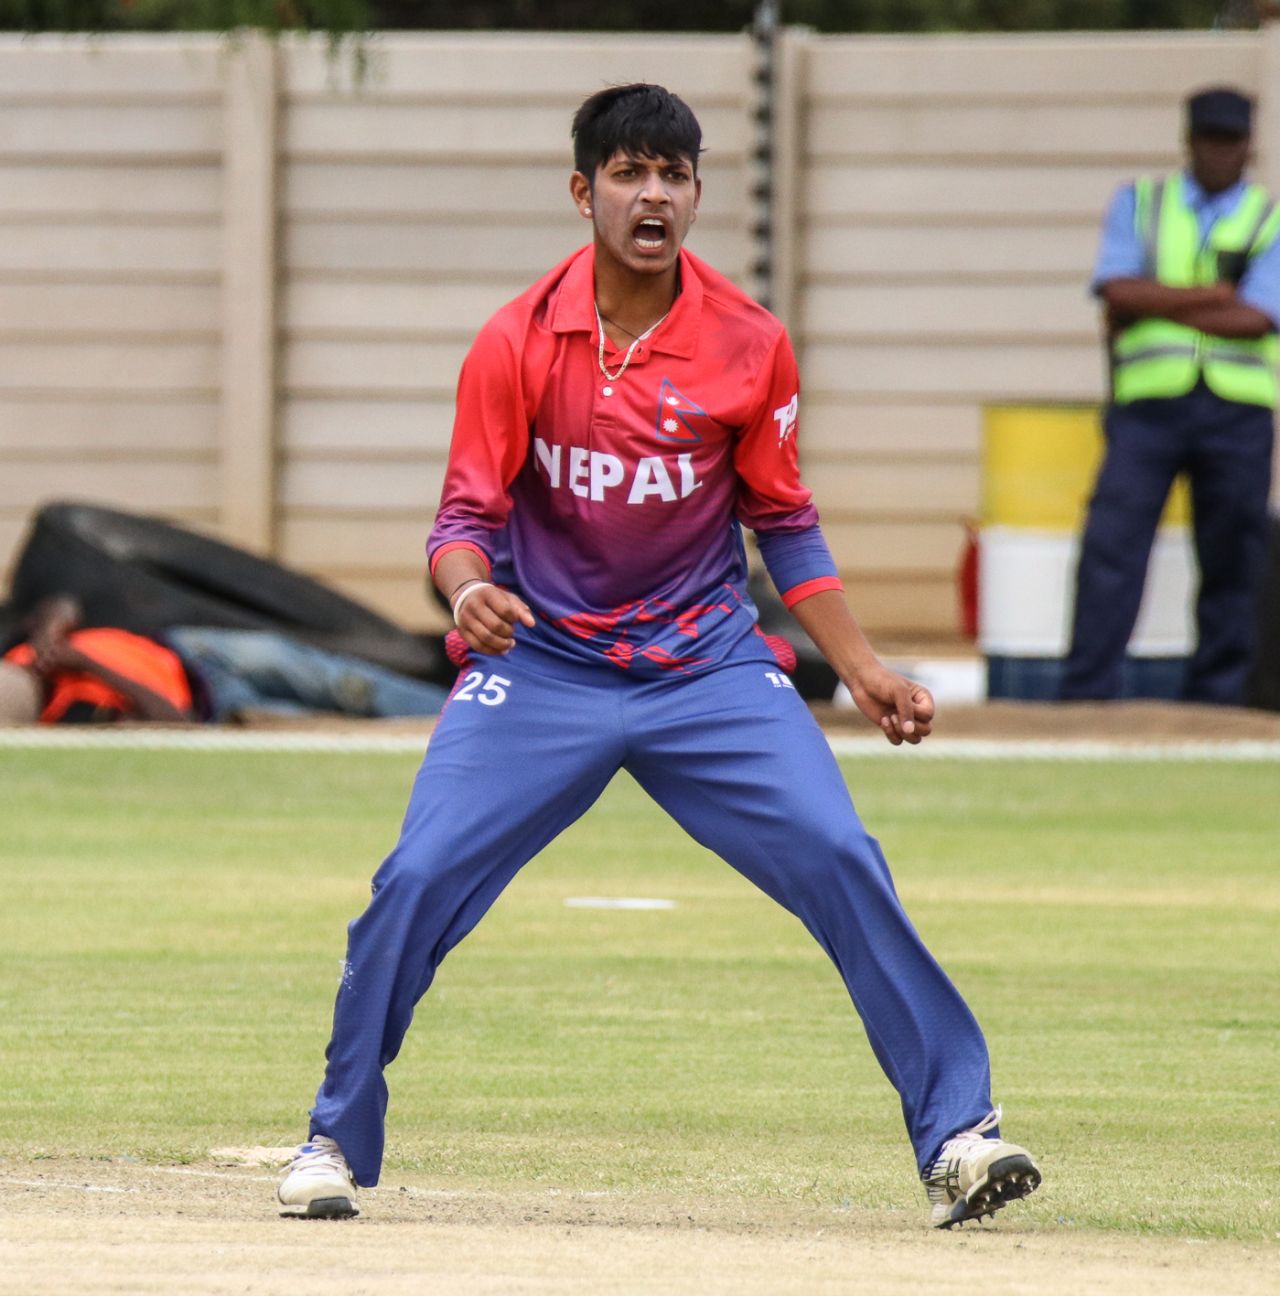 Sandeep Lamichhane has a relaxed attitude off the field but is all business on it, Nepal v Oman, ICC World Cricket League Division Two, Windhoek, February 9, 2018